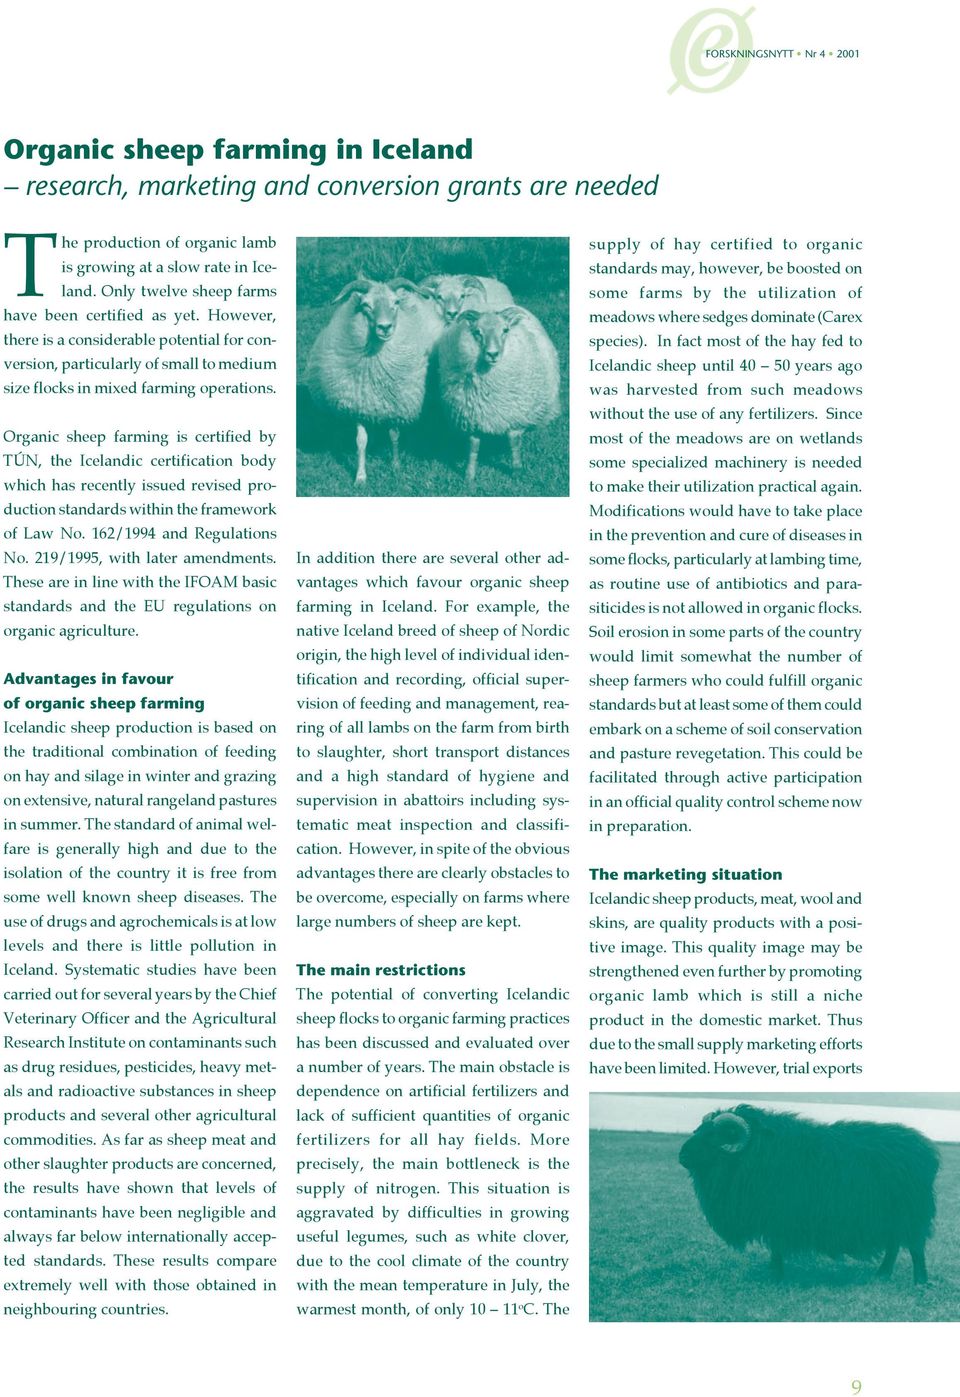 Organic sheep farming is certified by TÚN, the Icelandic certification body which has recently issued revised production standards within the framework of Law No. 162/1994 and Regulations No.